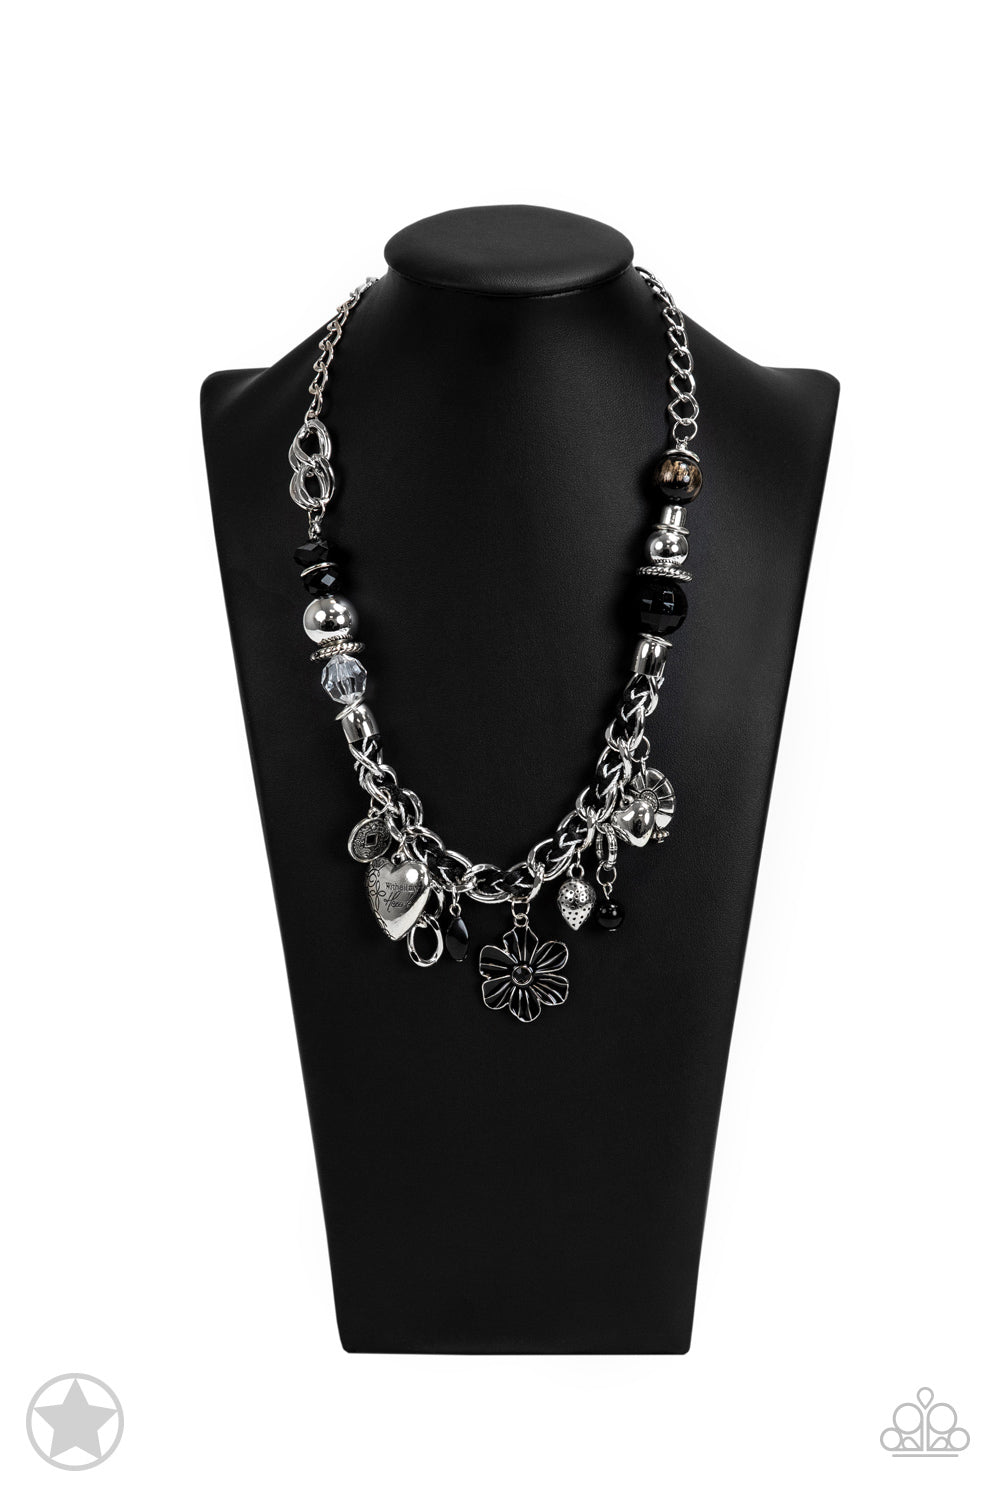 Charmed I Am Sure - Black Silver Chain and Charm Short Necklace - Blockbuster